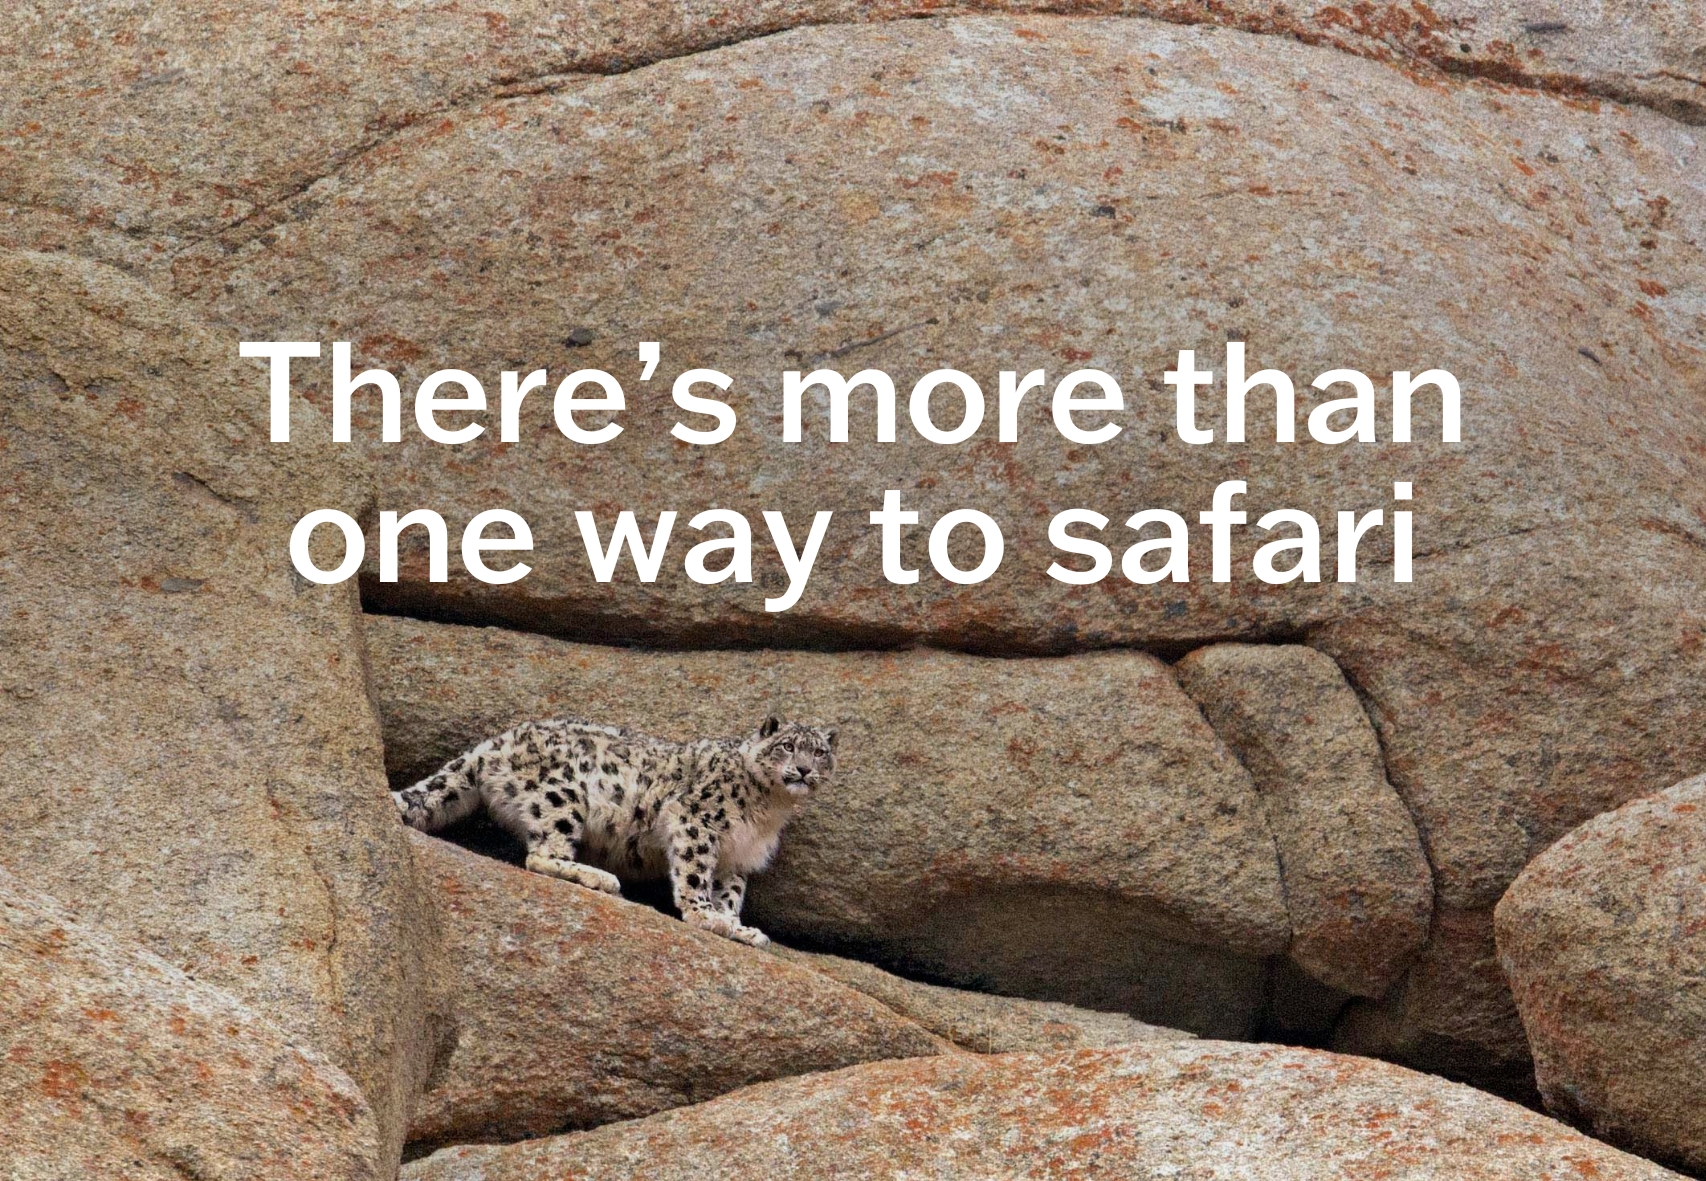 There's more than one way to safari